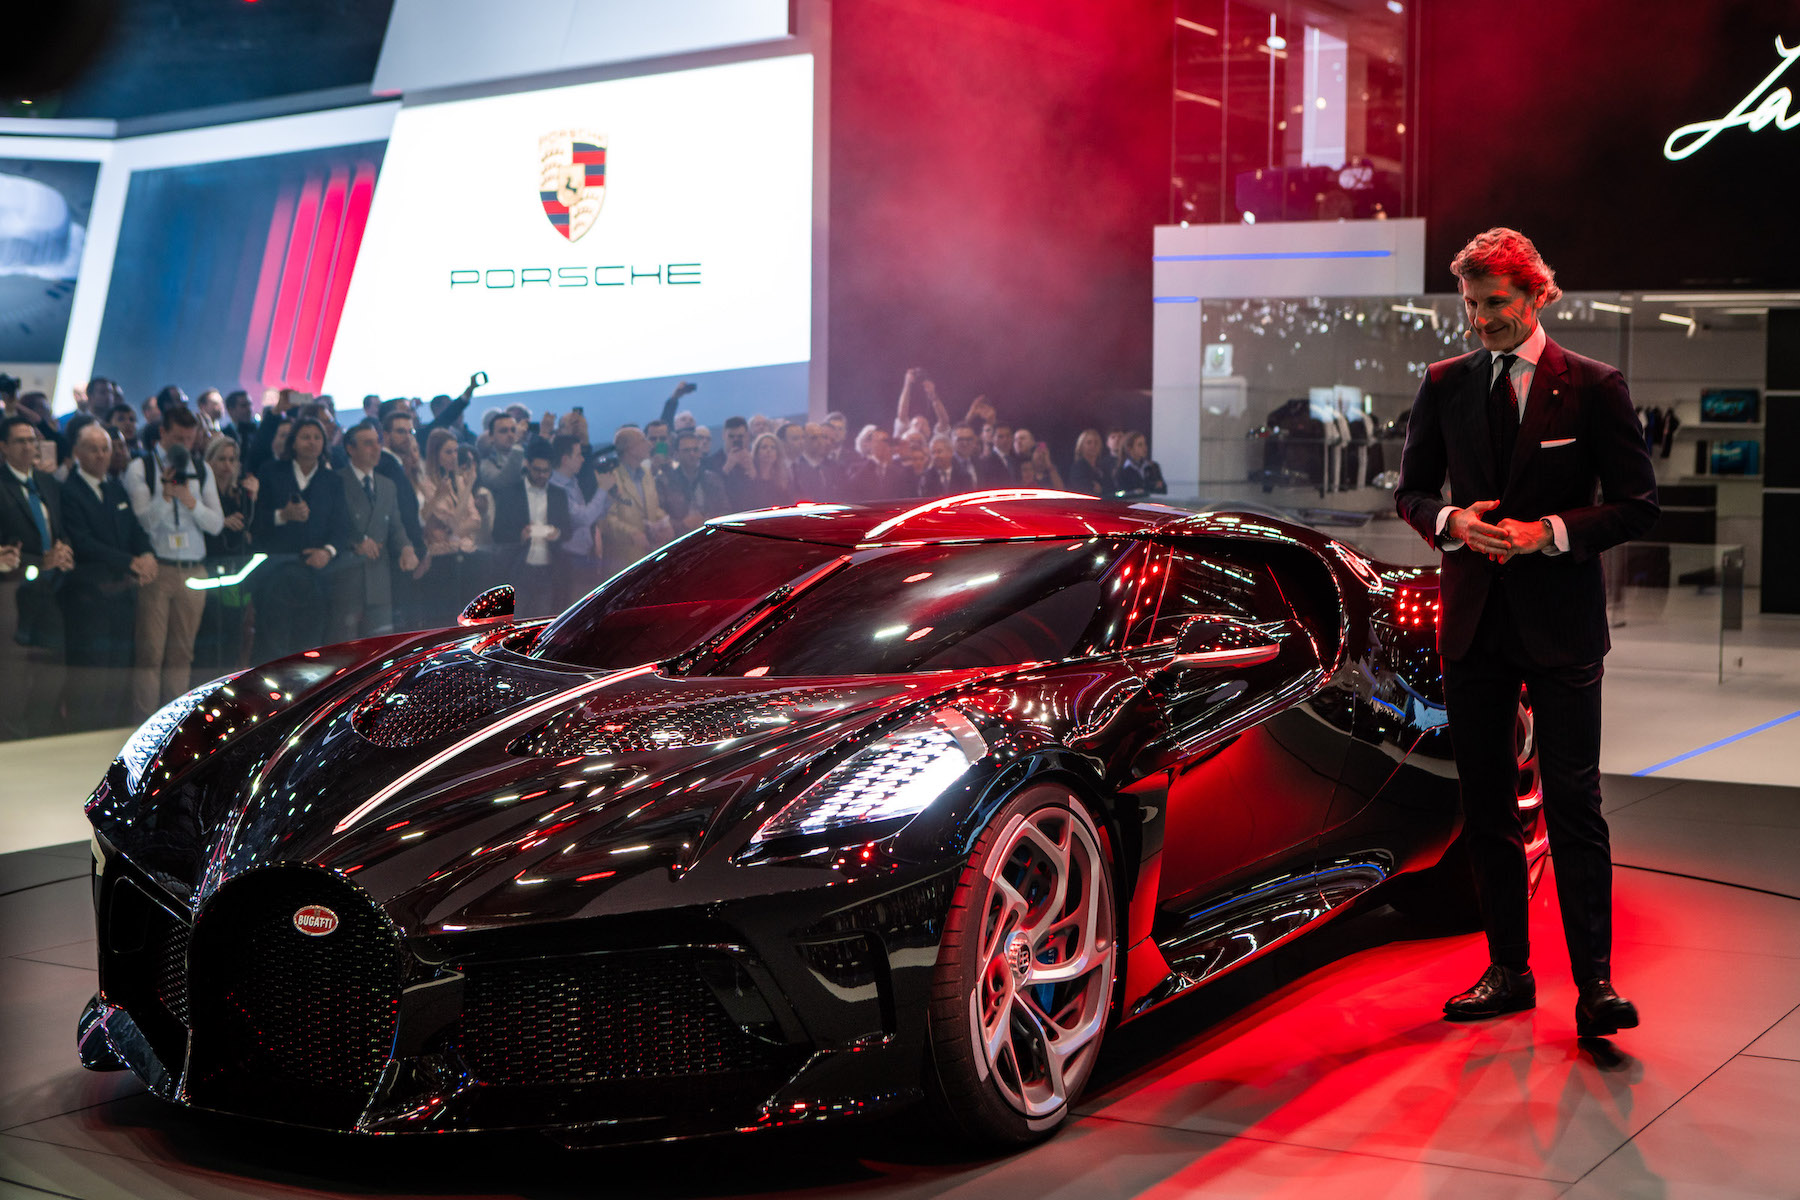 At $19 Million, Bugatti’s La Voiture Noire Becomes the Most Expensive New Car Ever